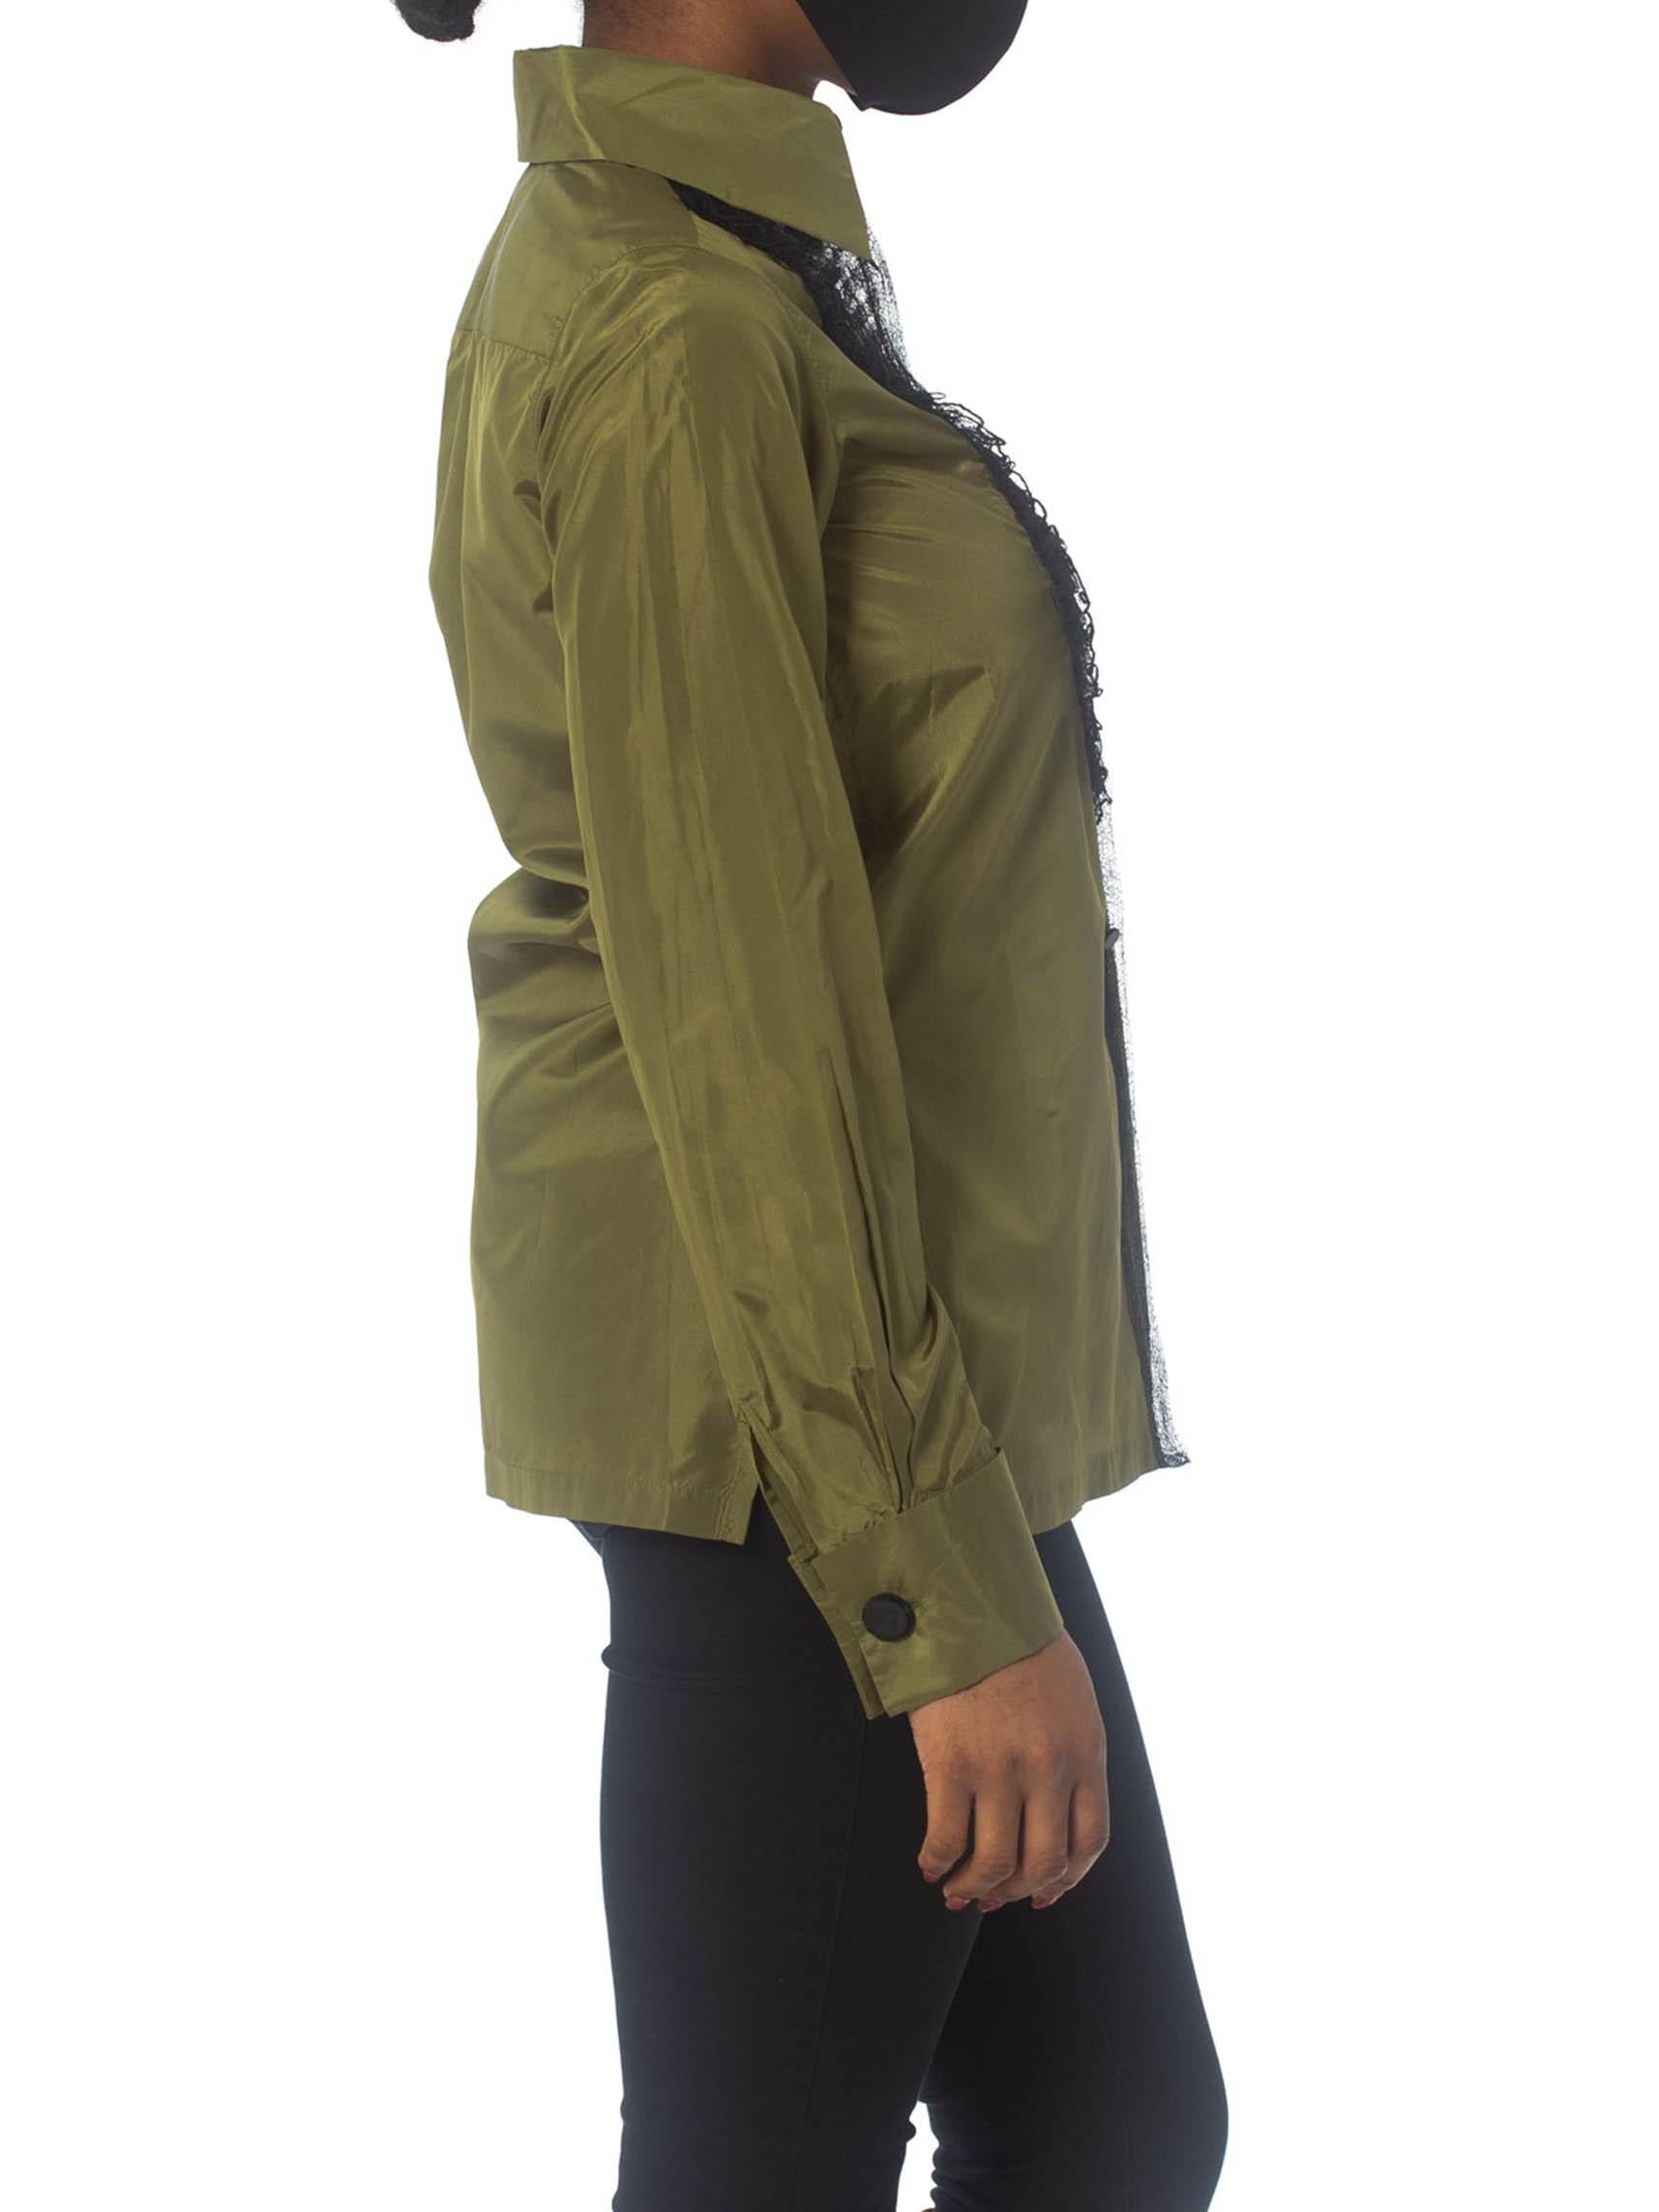 Women's 1990S LOULOU DEL LA FALAISE Olive Green Silk Taffeta Blouse With Chantilly Lace For Sale